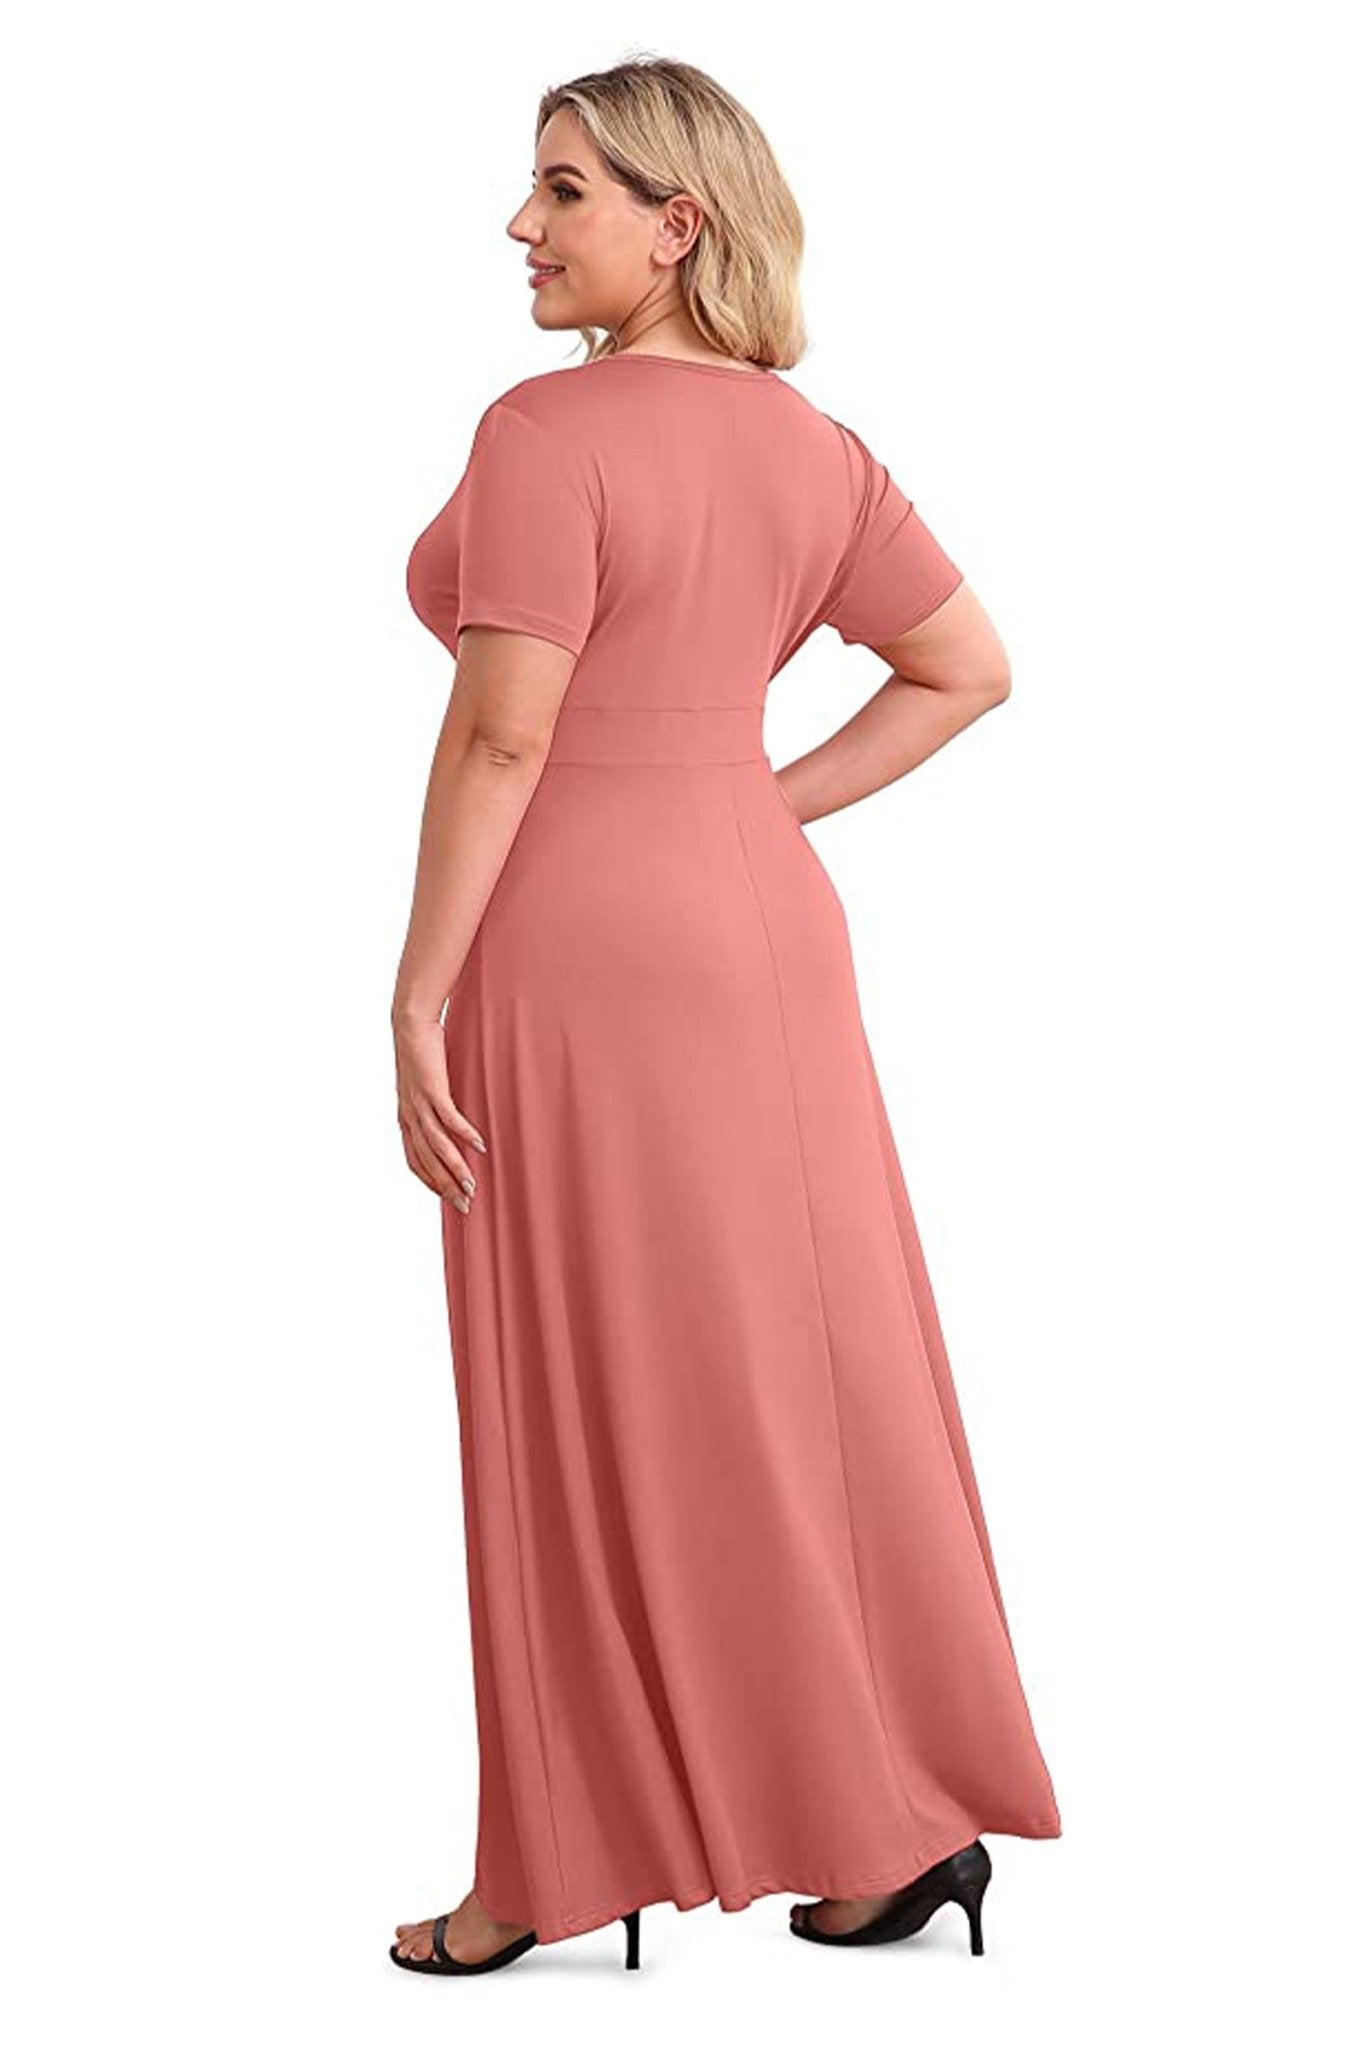 Women's Solid Formal Maxi Dress, Plus Size Gown - POSESHE